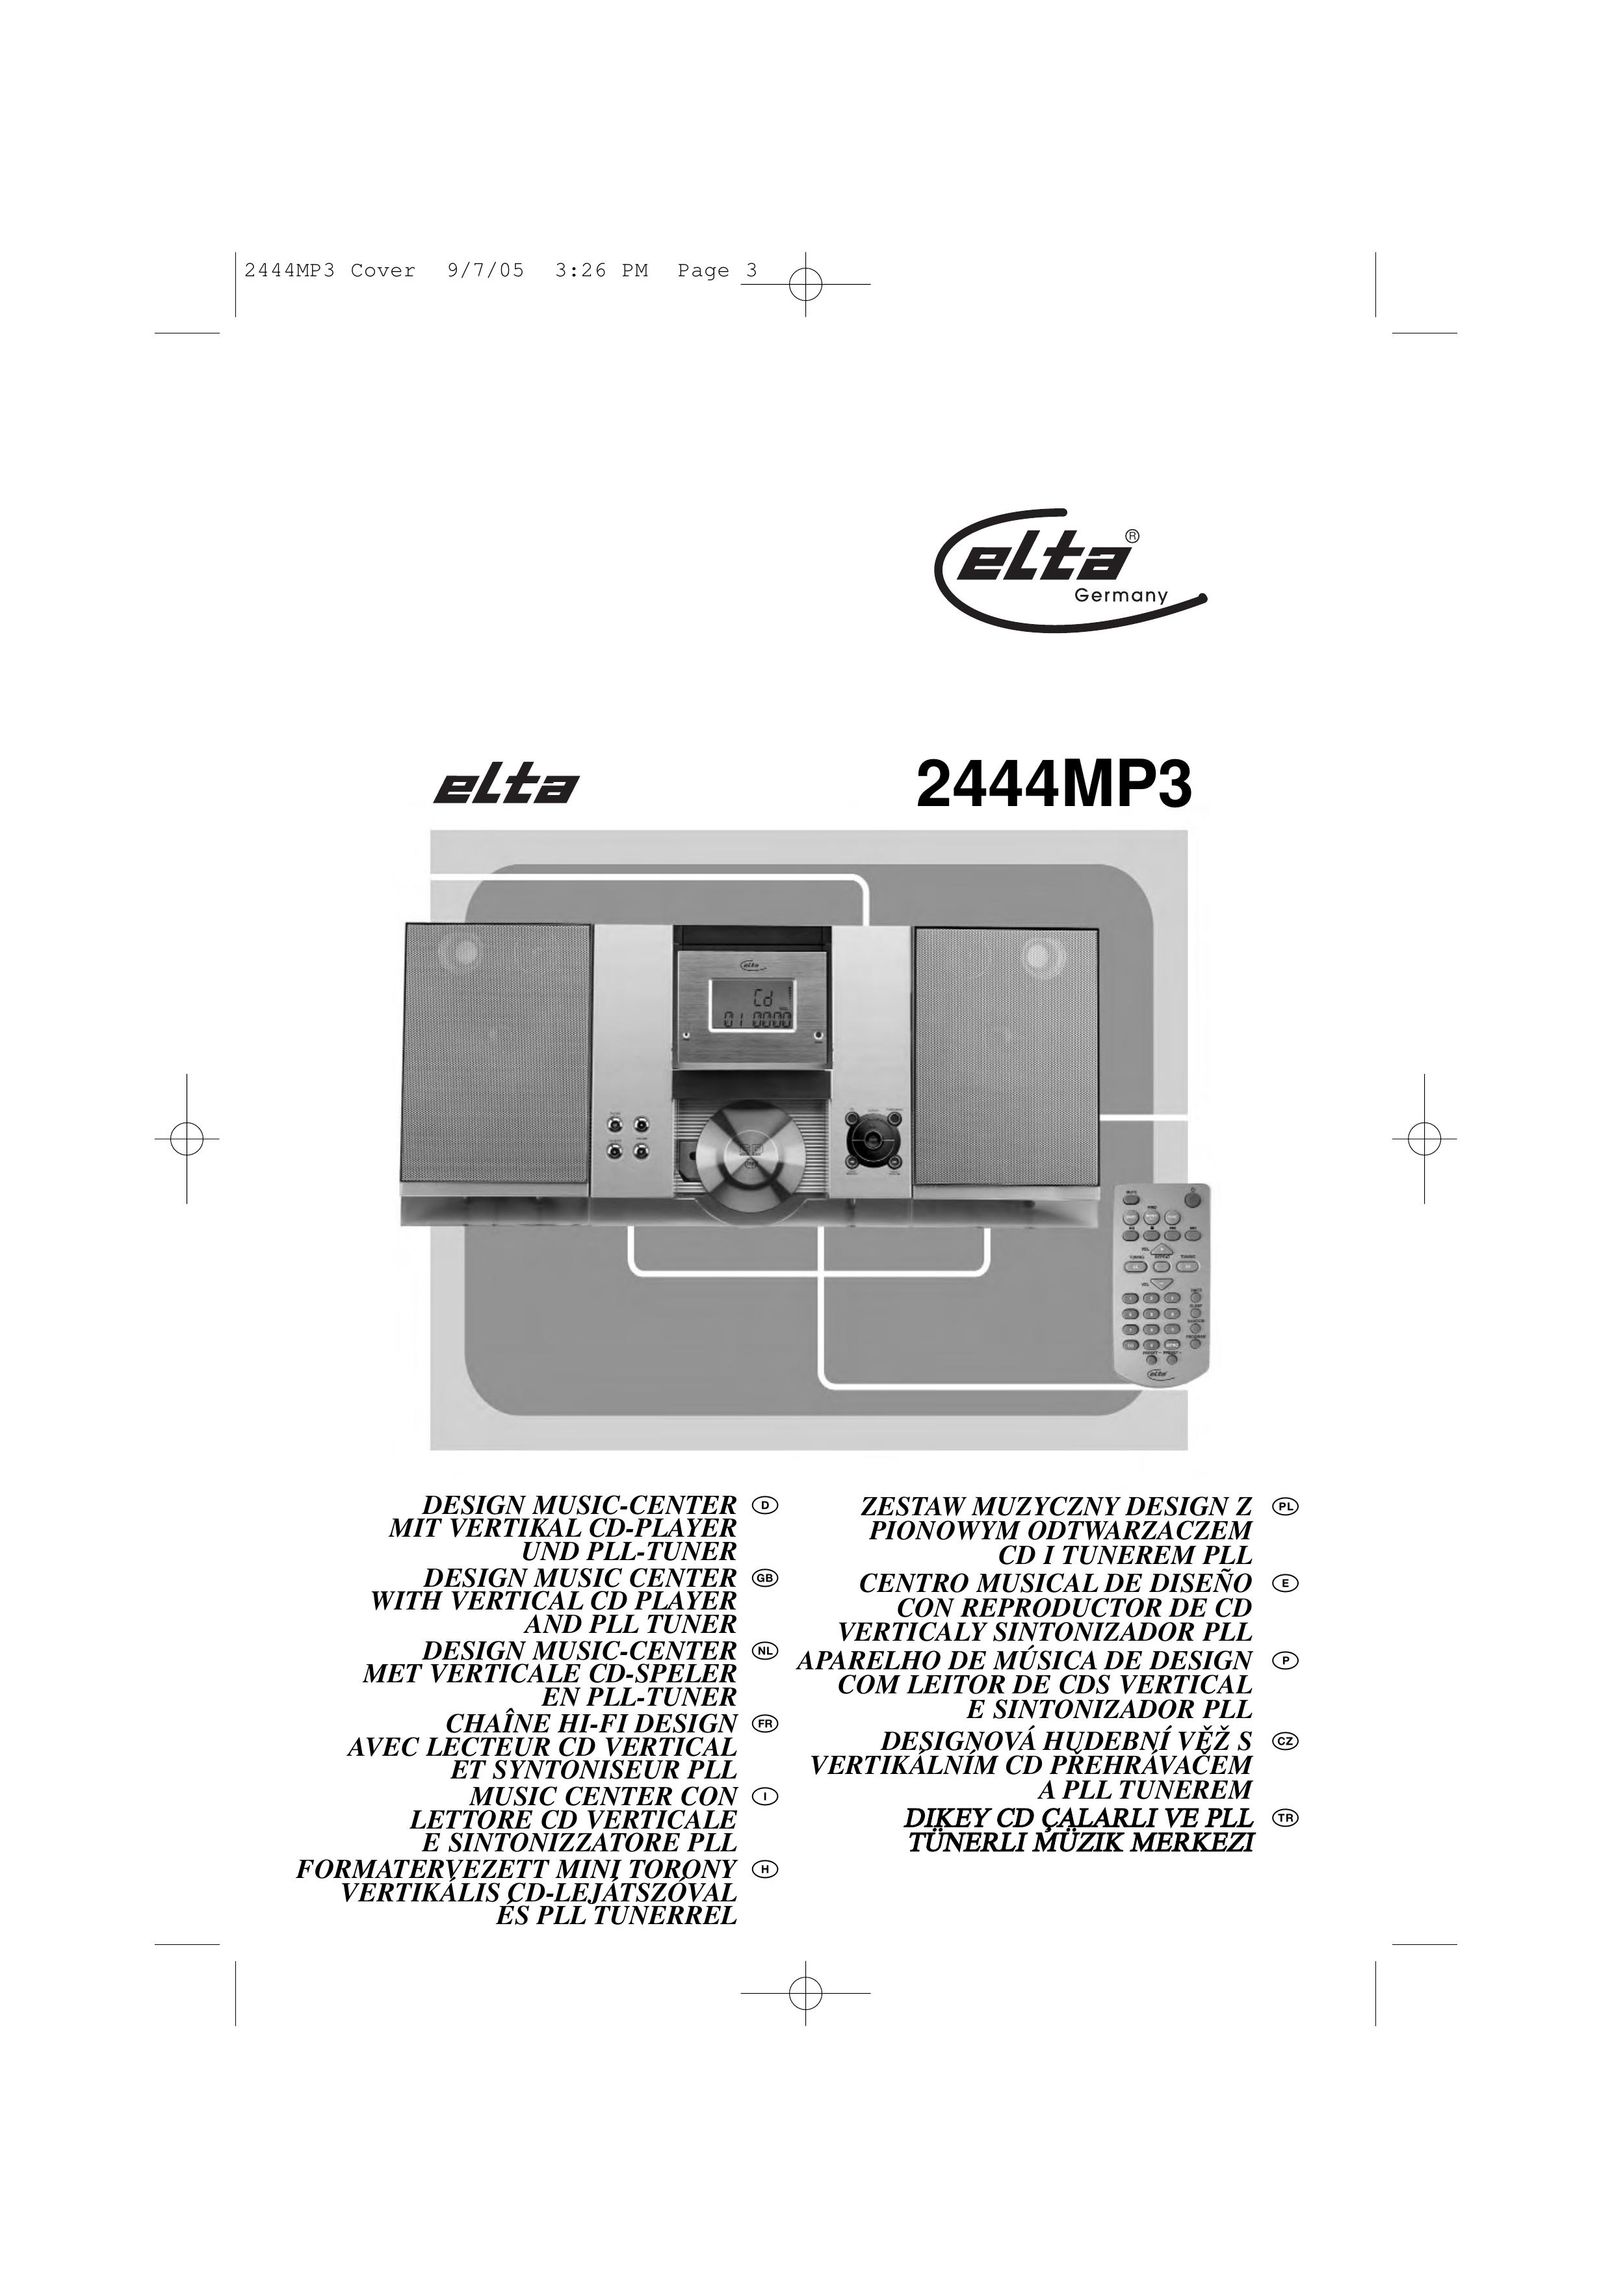 Elta 2444MP3 CD Player User Manual (Page 1)